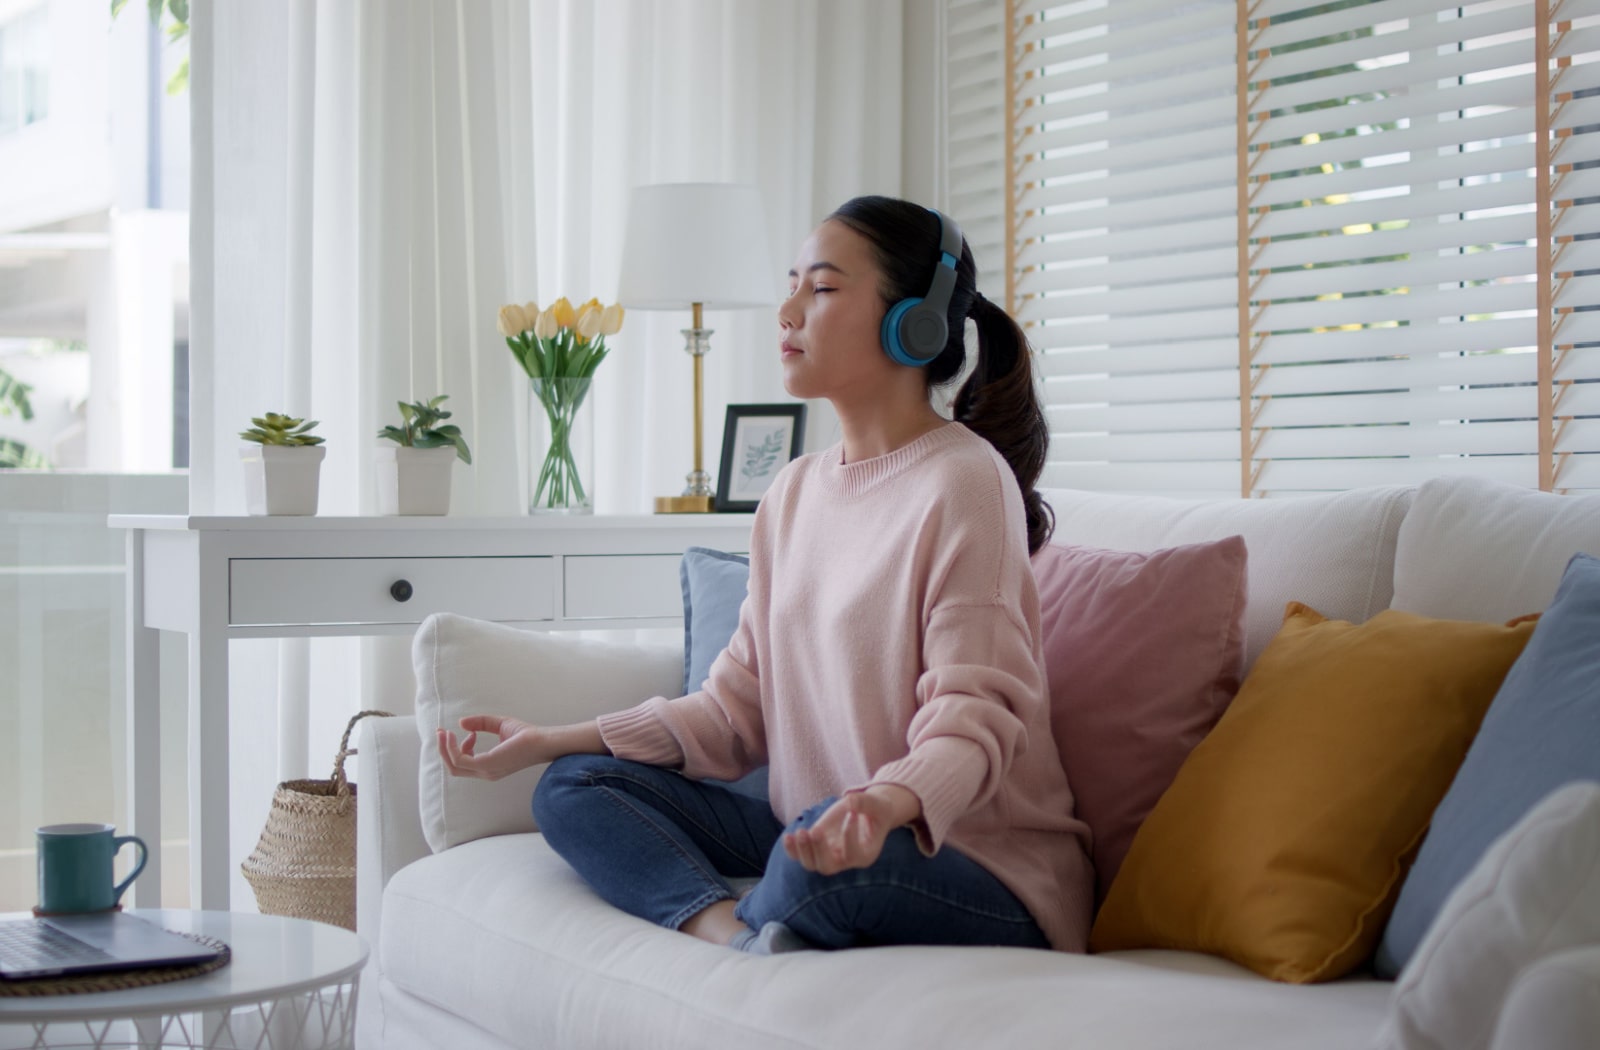 A teenage girl meditating on her couch and she is wearing headphones over her ears